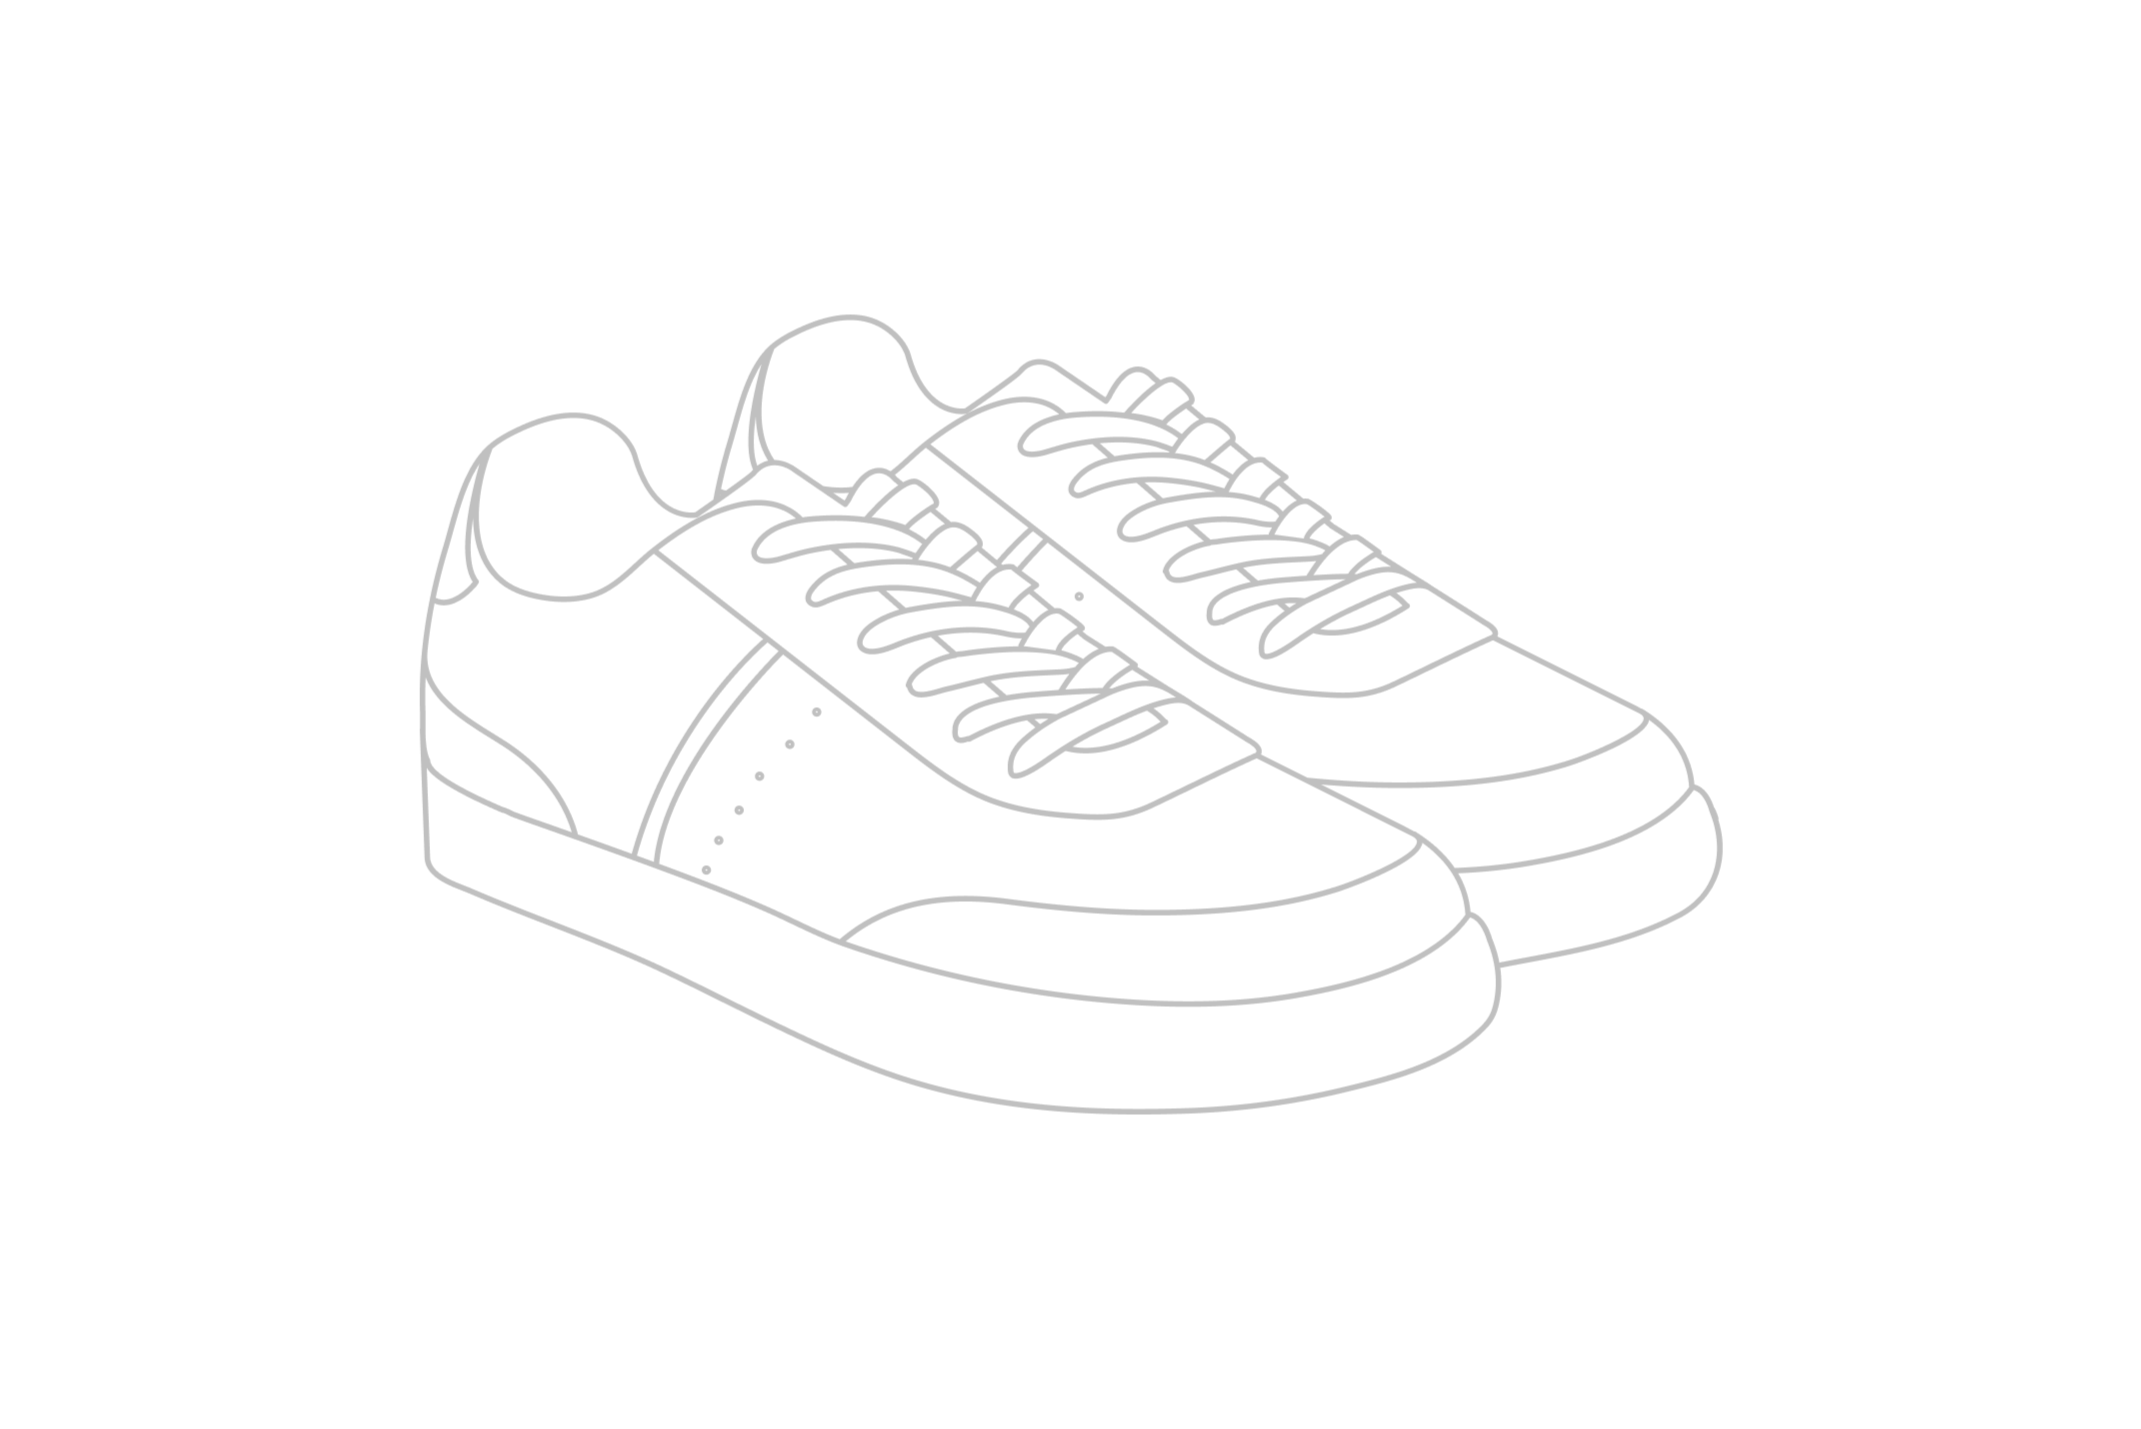 Illustration of a mens pair of shoes